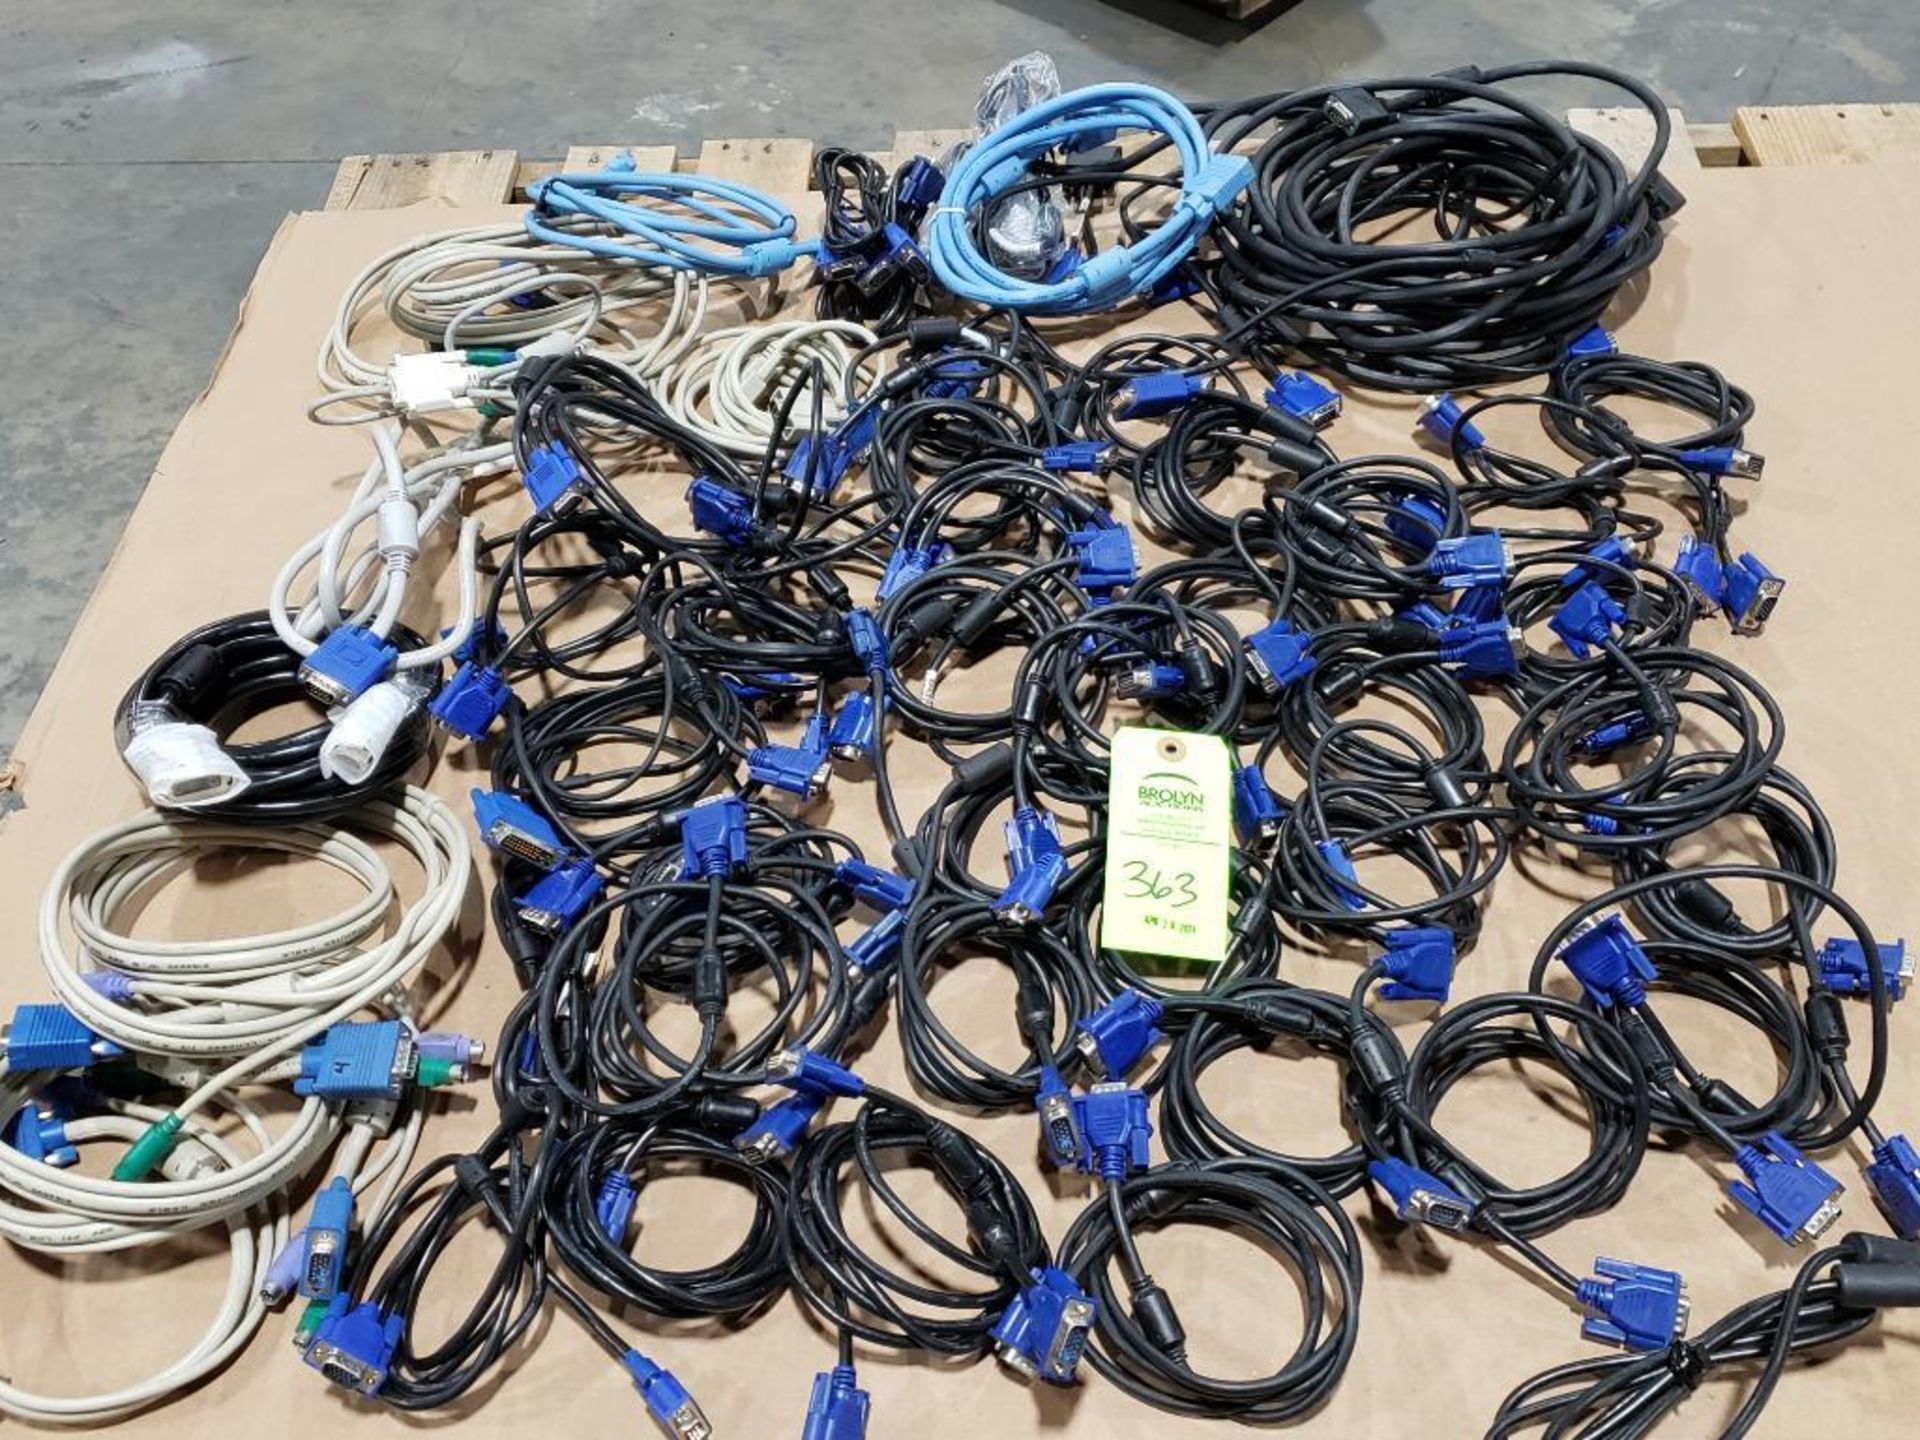 Large assortment of monitor cords.